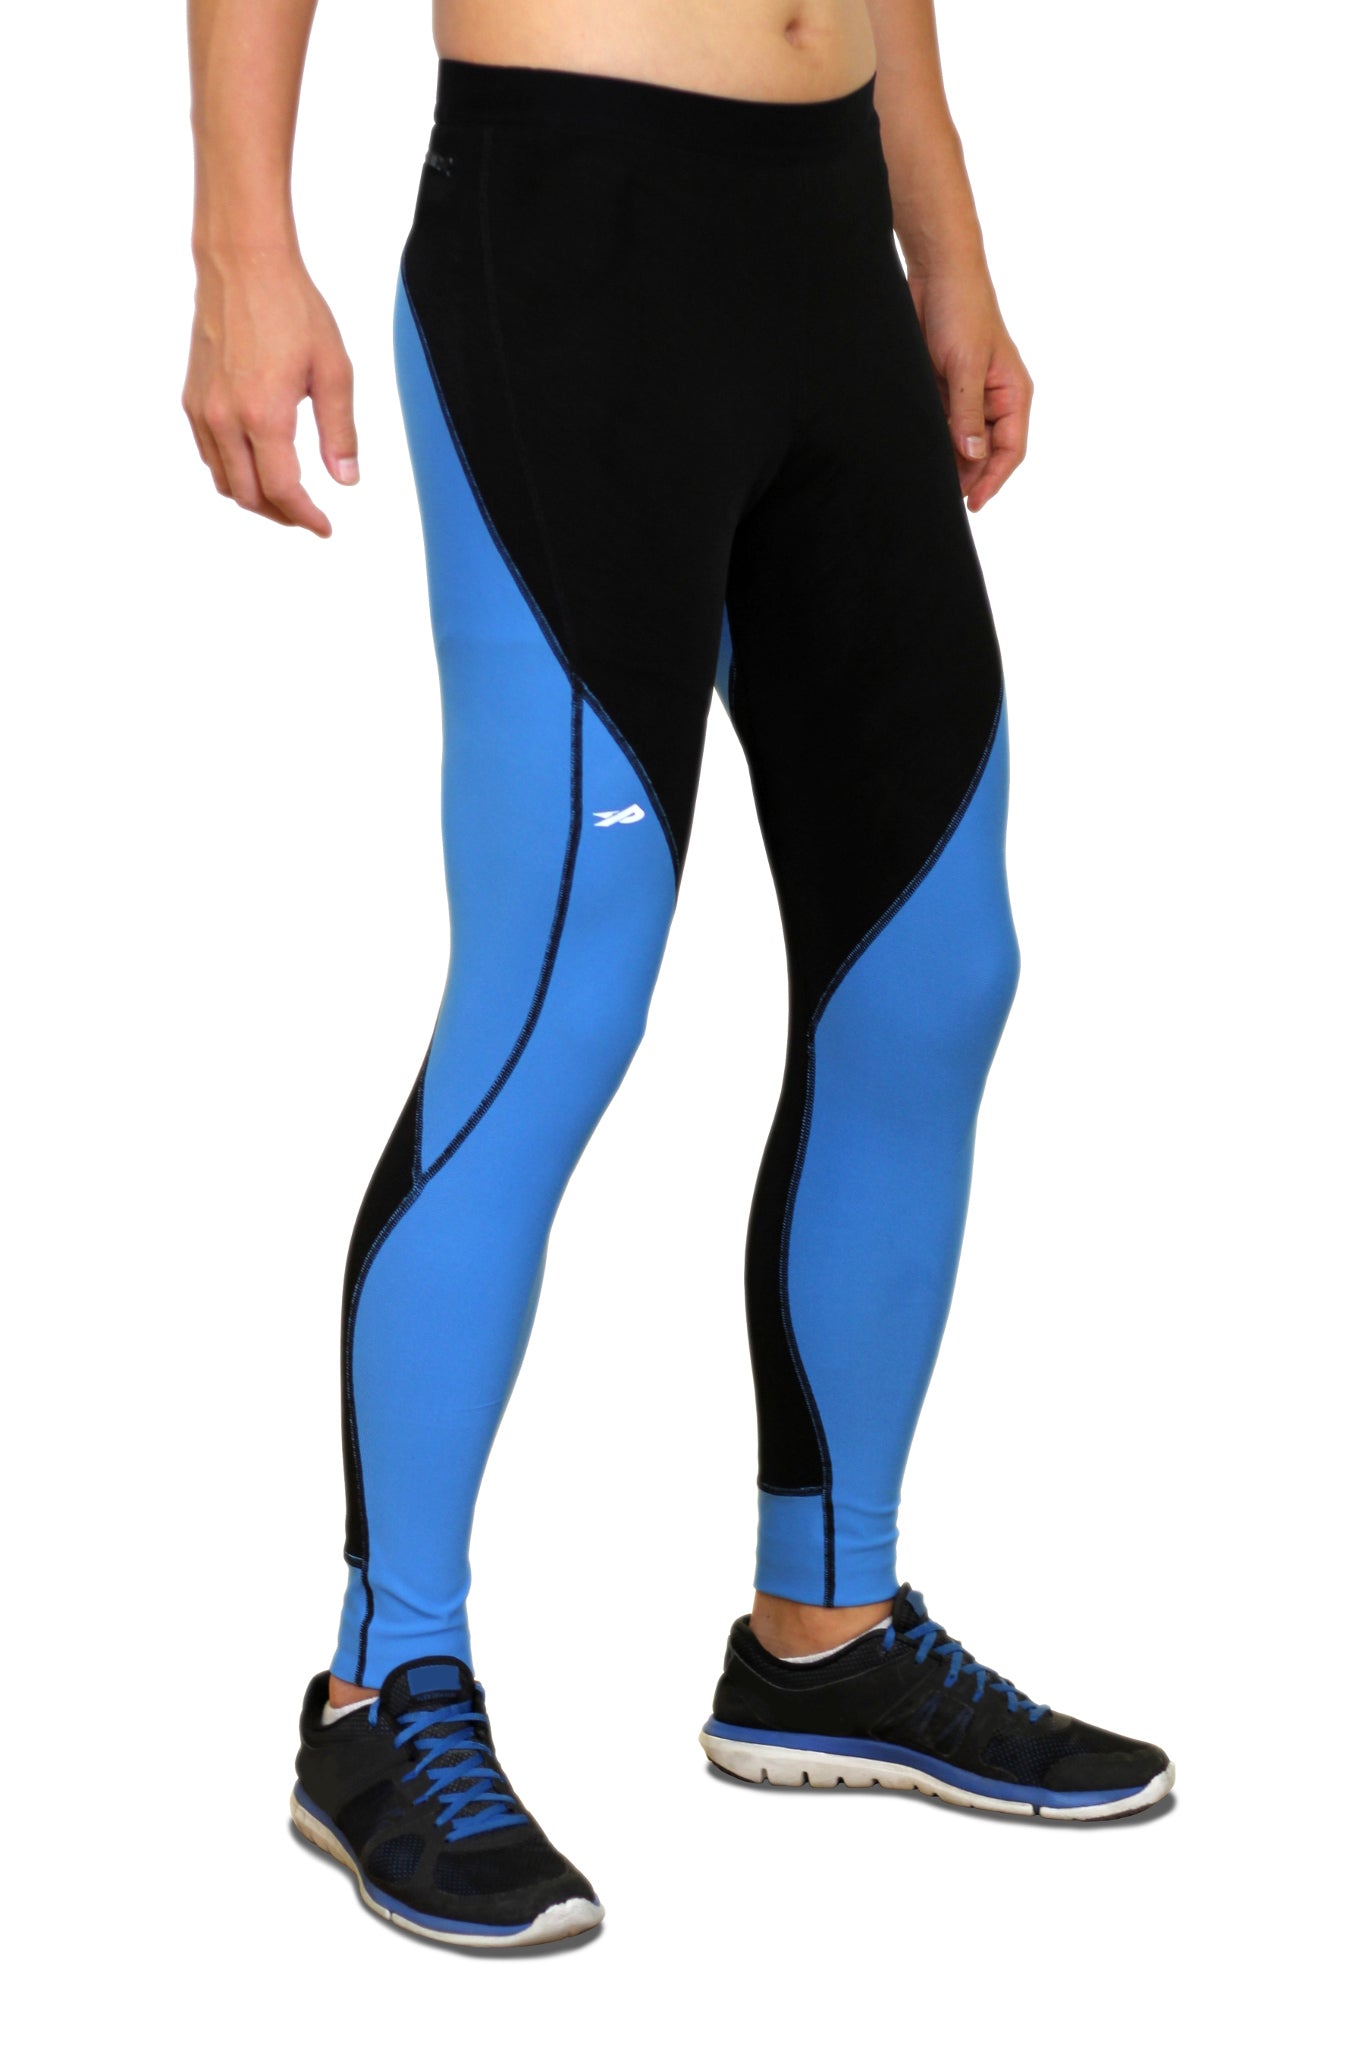 Pro Resistance Tights for Men - Olympic Blue – Physiclo